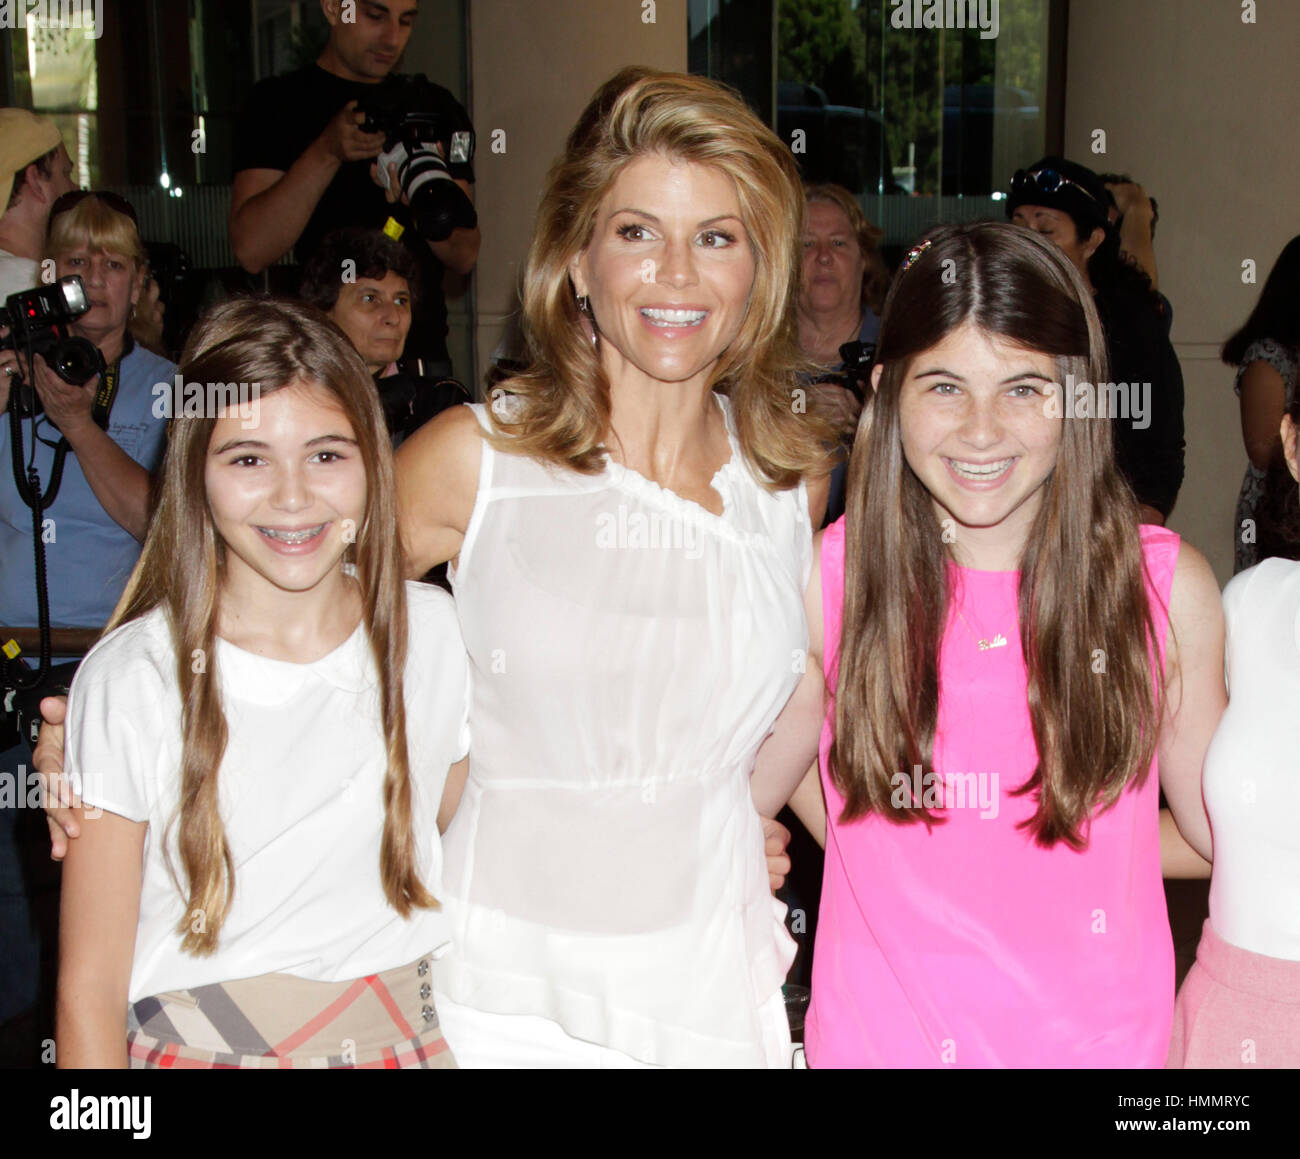 Lori Loughlin, center, with her daughters, Olivia Jade Giannulli, left, and Isabella Rose Giannulli arrive for the Hallmark Channel and Hallmark Movie Channel presentation at the 2013 Summer TV Critics Press Tour on July 24, 2013 in Beverly Hills, California. Photo by Francis Specker Stock Photo